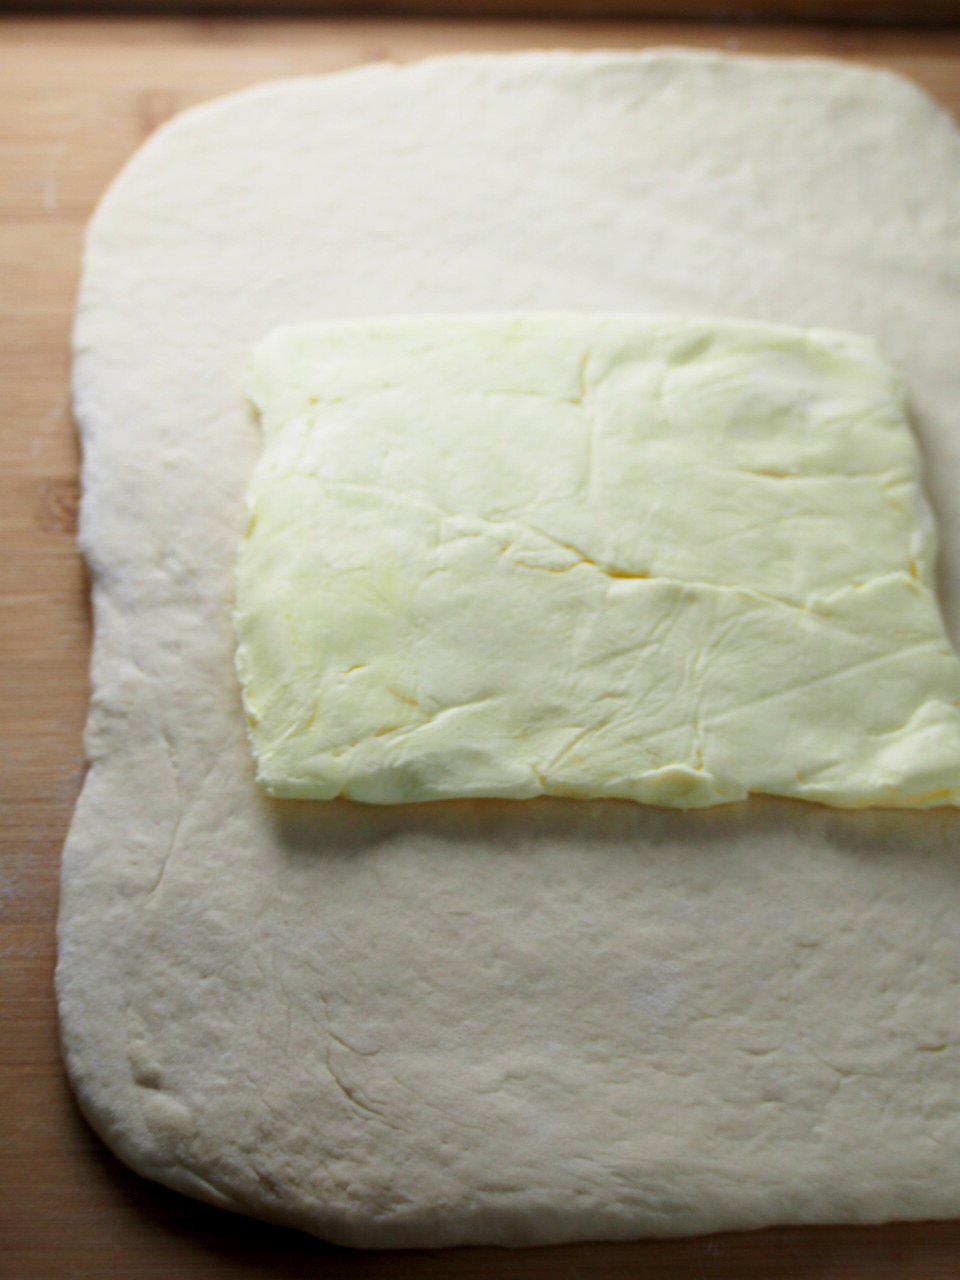 The butter block place in the center of the rectangular dough.